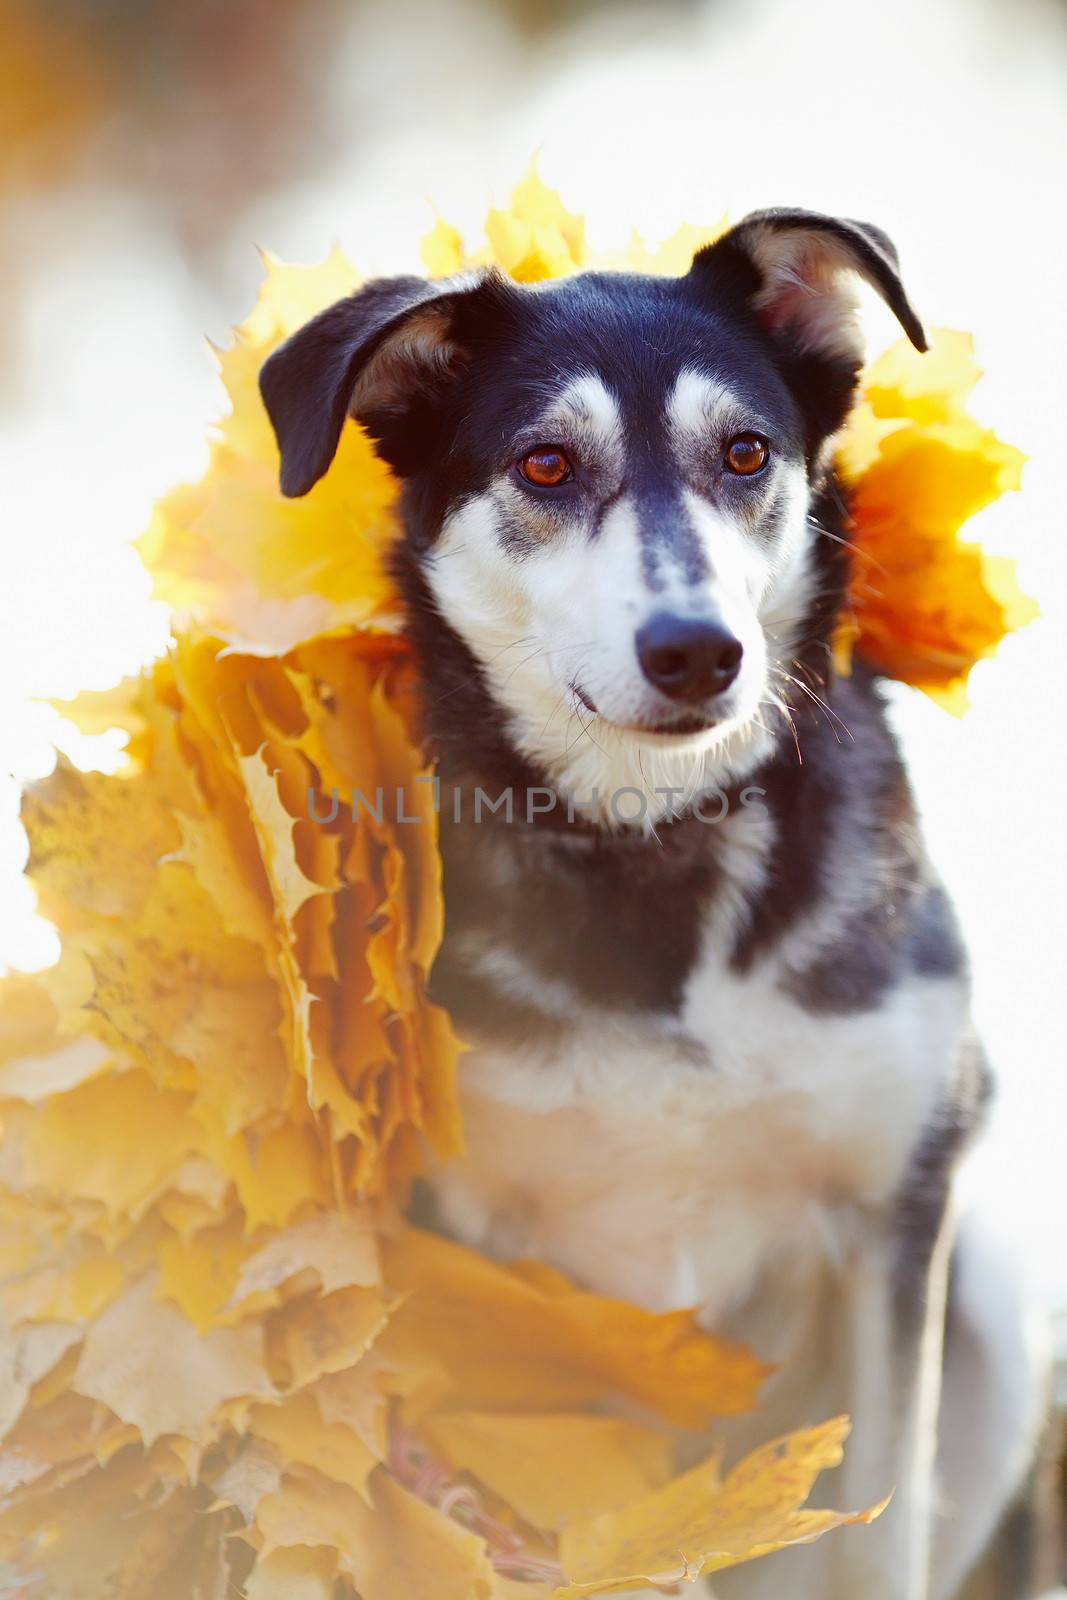 Dog in yellow autumn leaves. Not purebred dog. Doggie on walk. The large not purebred mongrel.